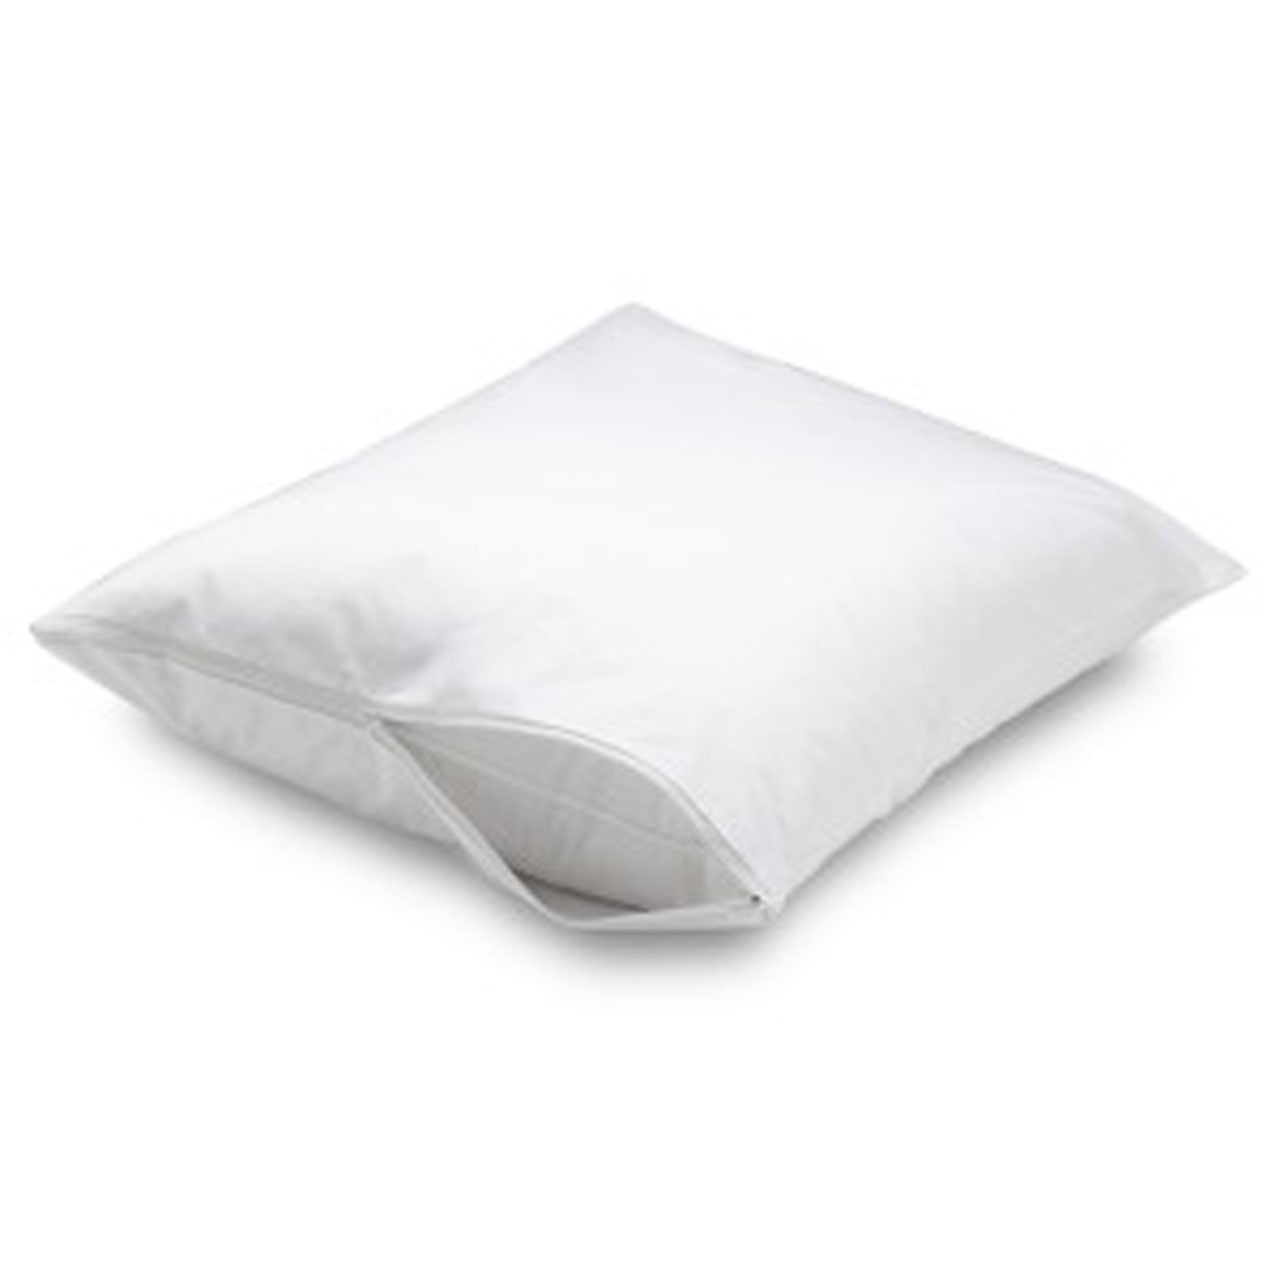 Can I wash the bulk pillow protectors if they're woven and zippered?